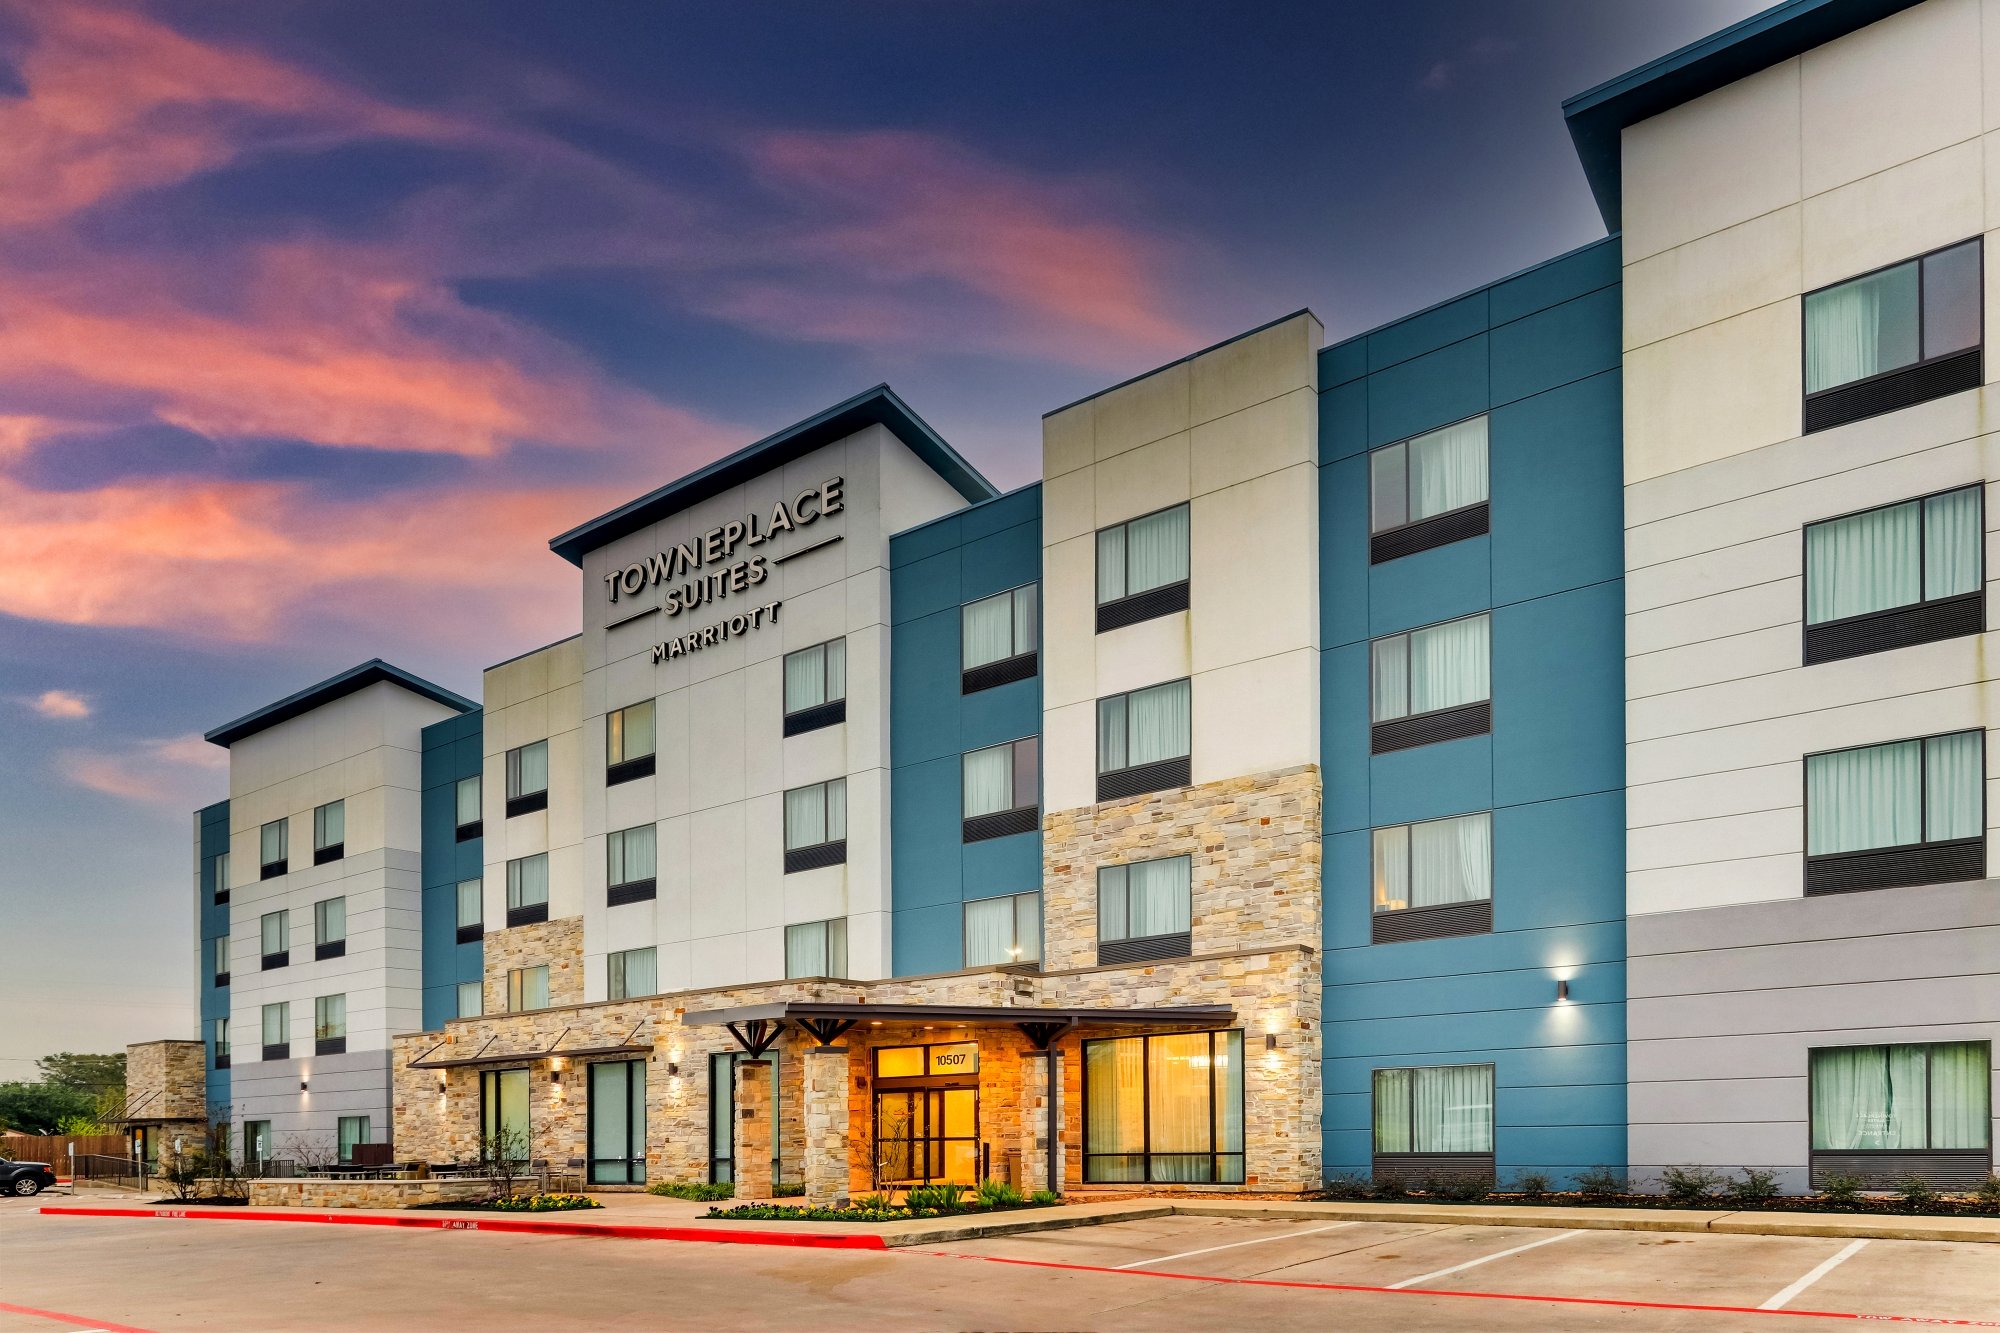 TownePlace Suites Houston I-10 East